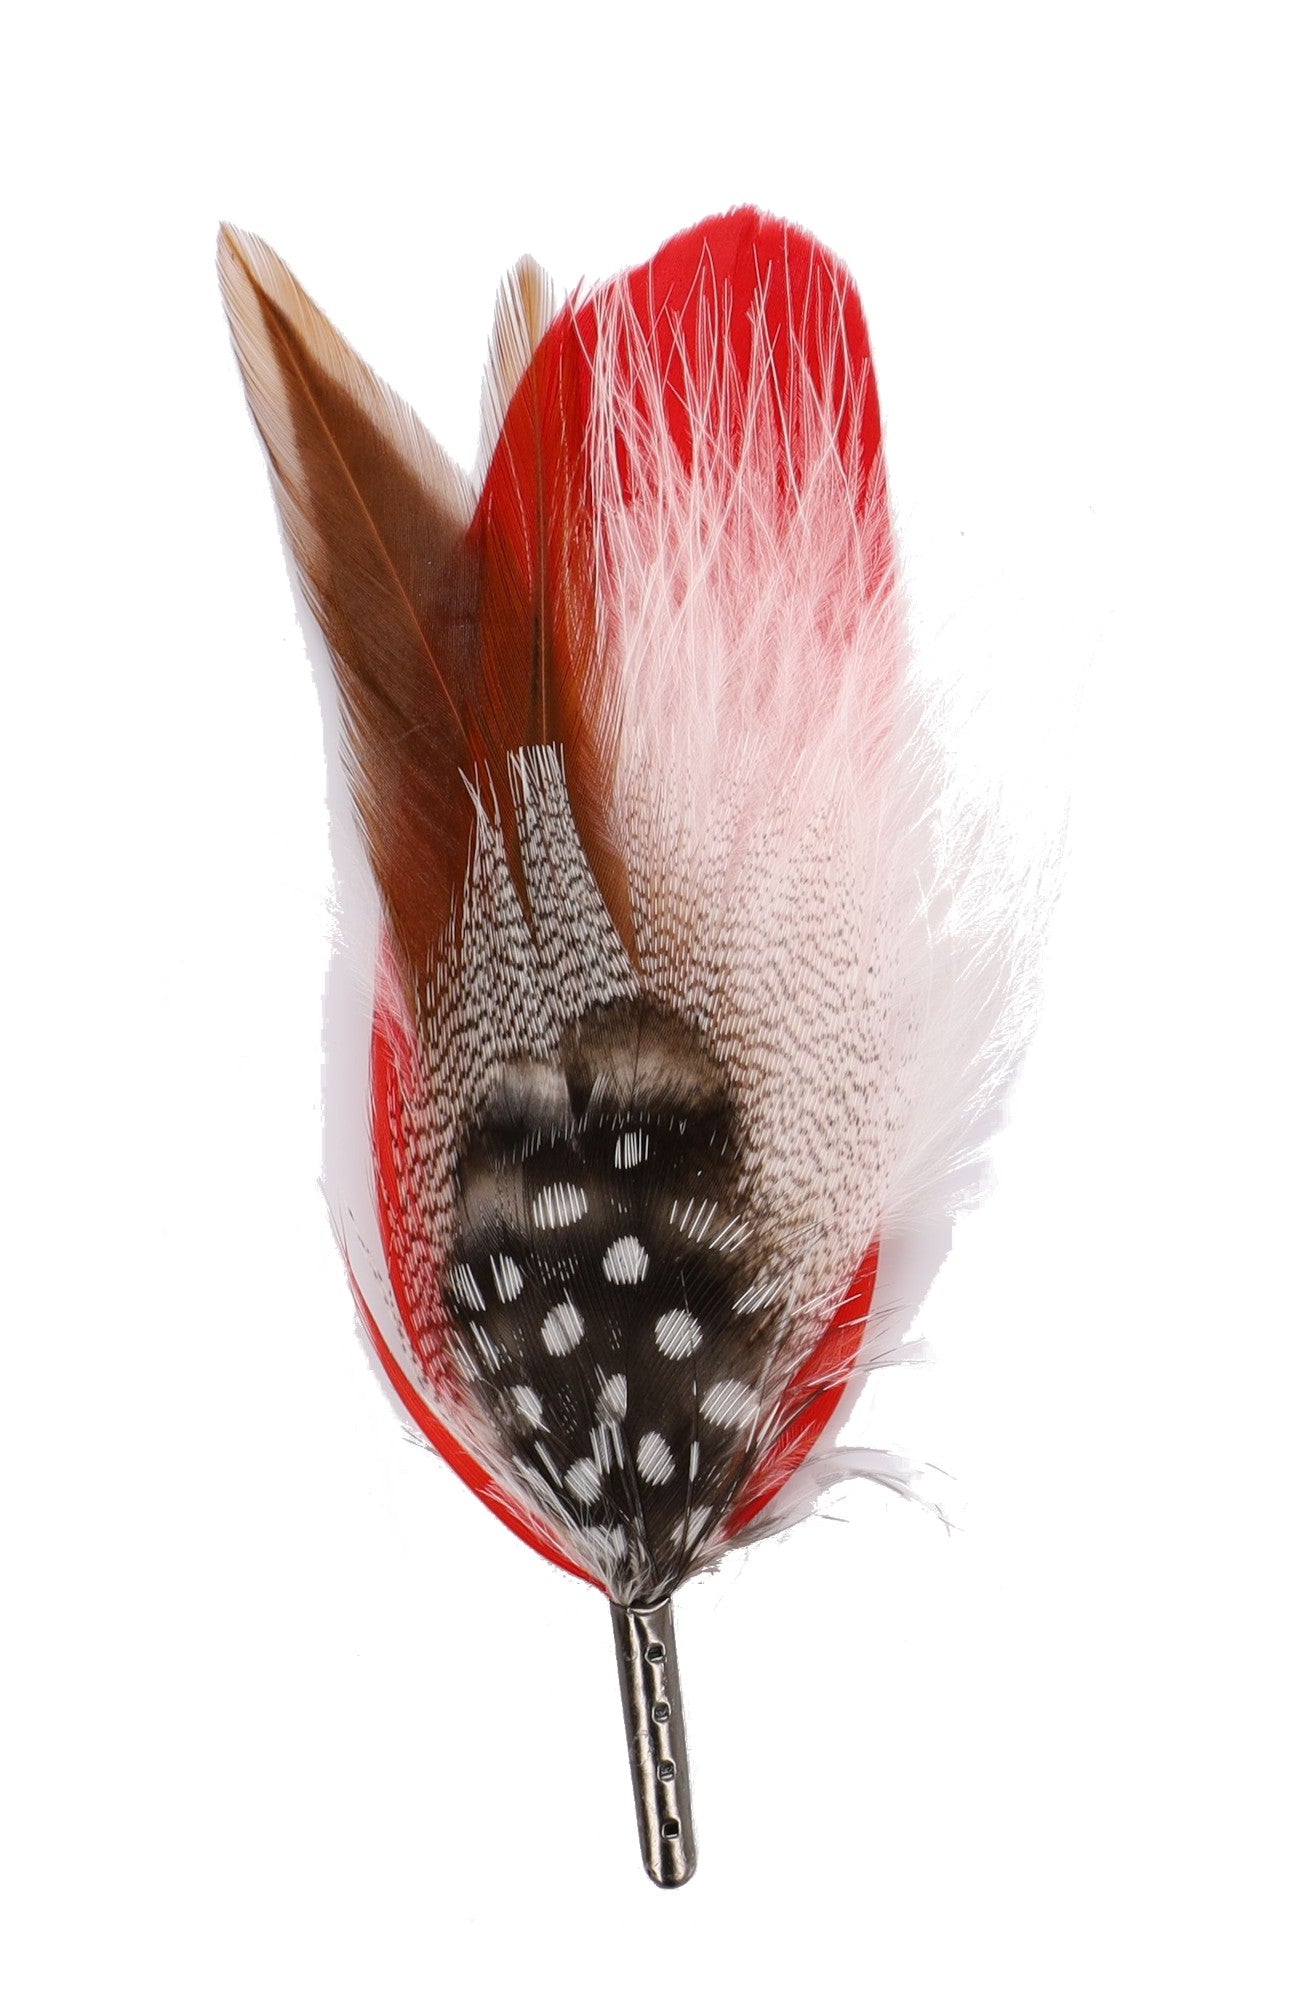 DapperFam Red / Brown / White 5 in Guinea & Poultry Hat Feather in Black Tip